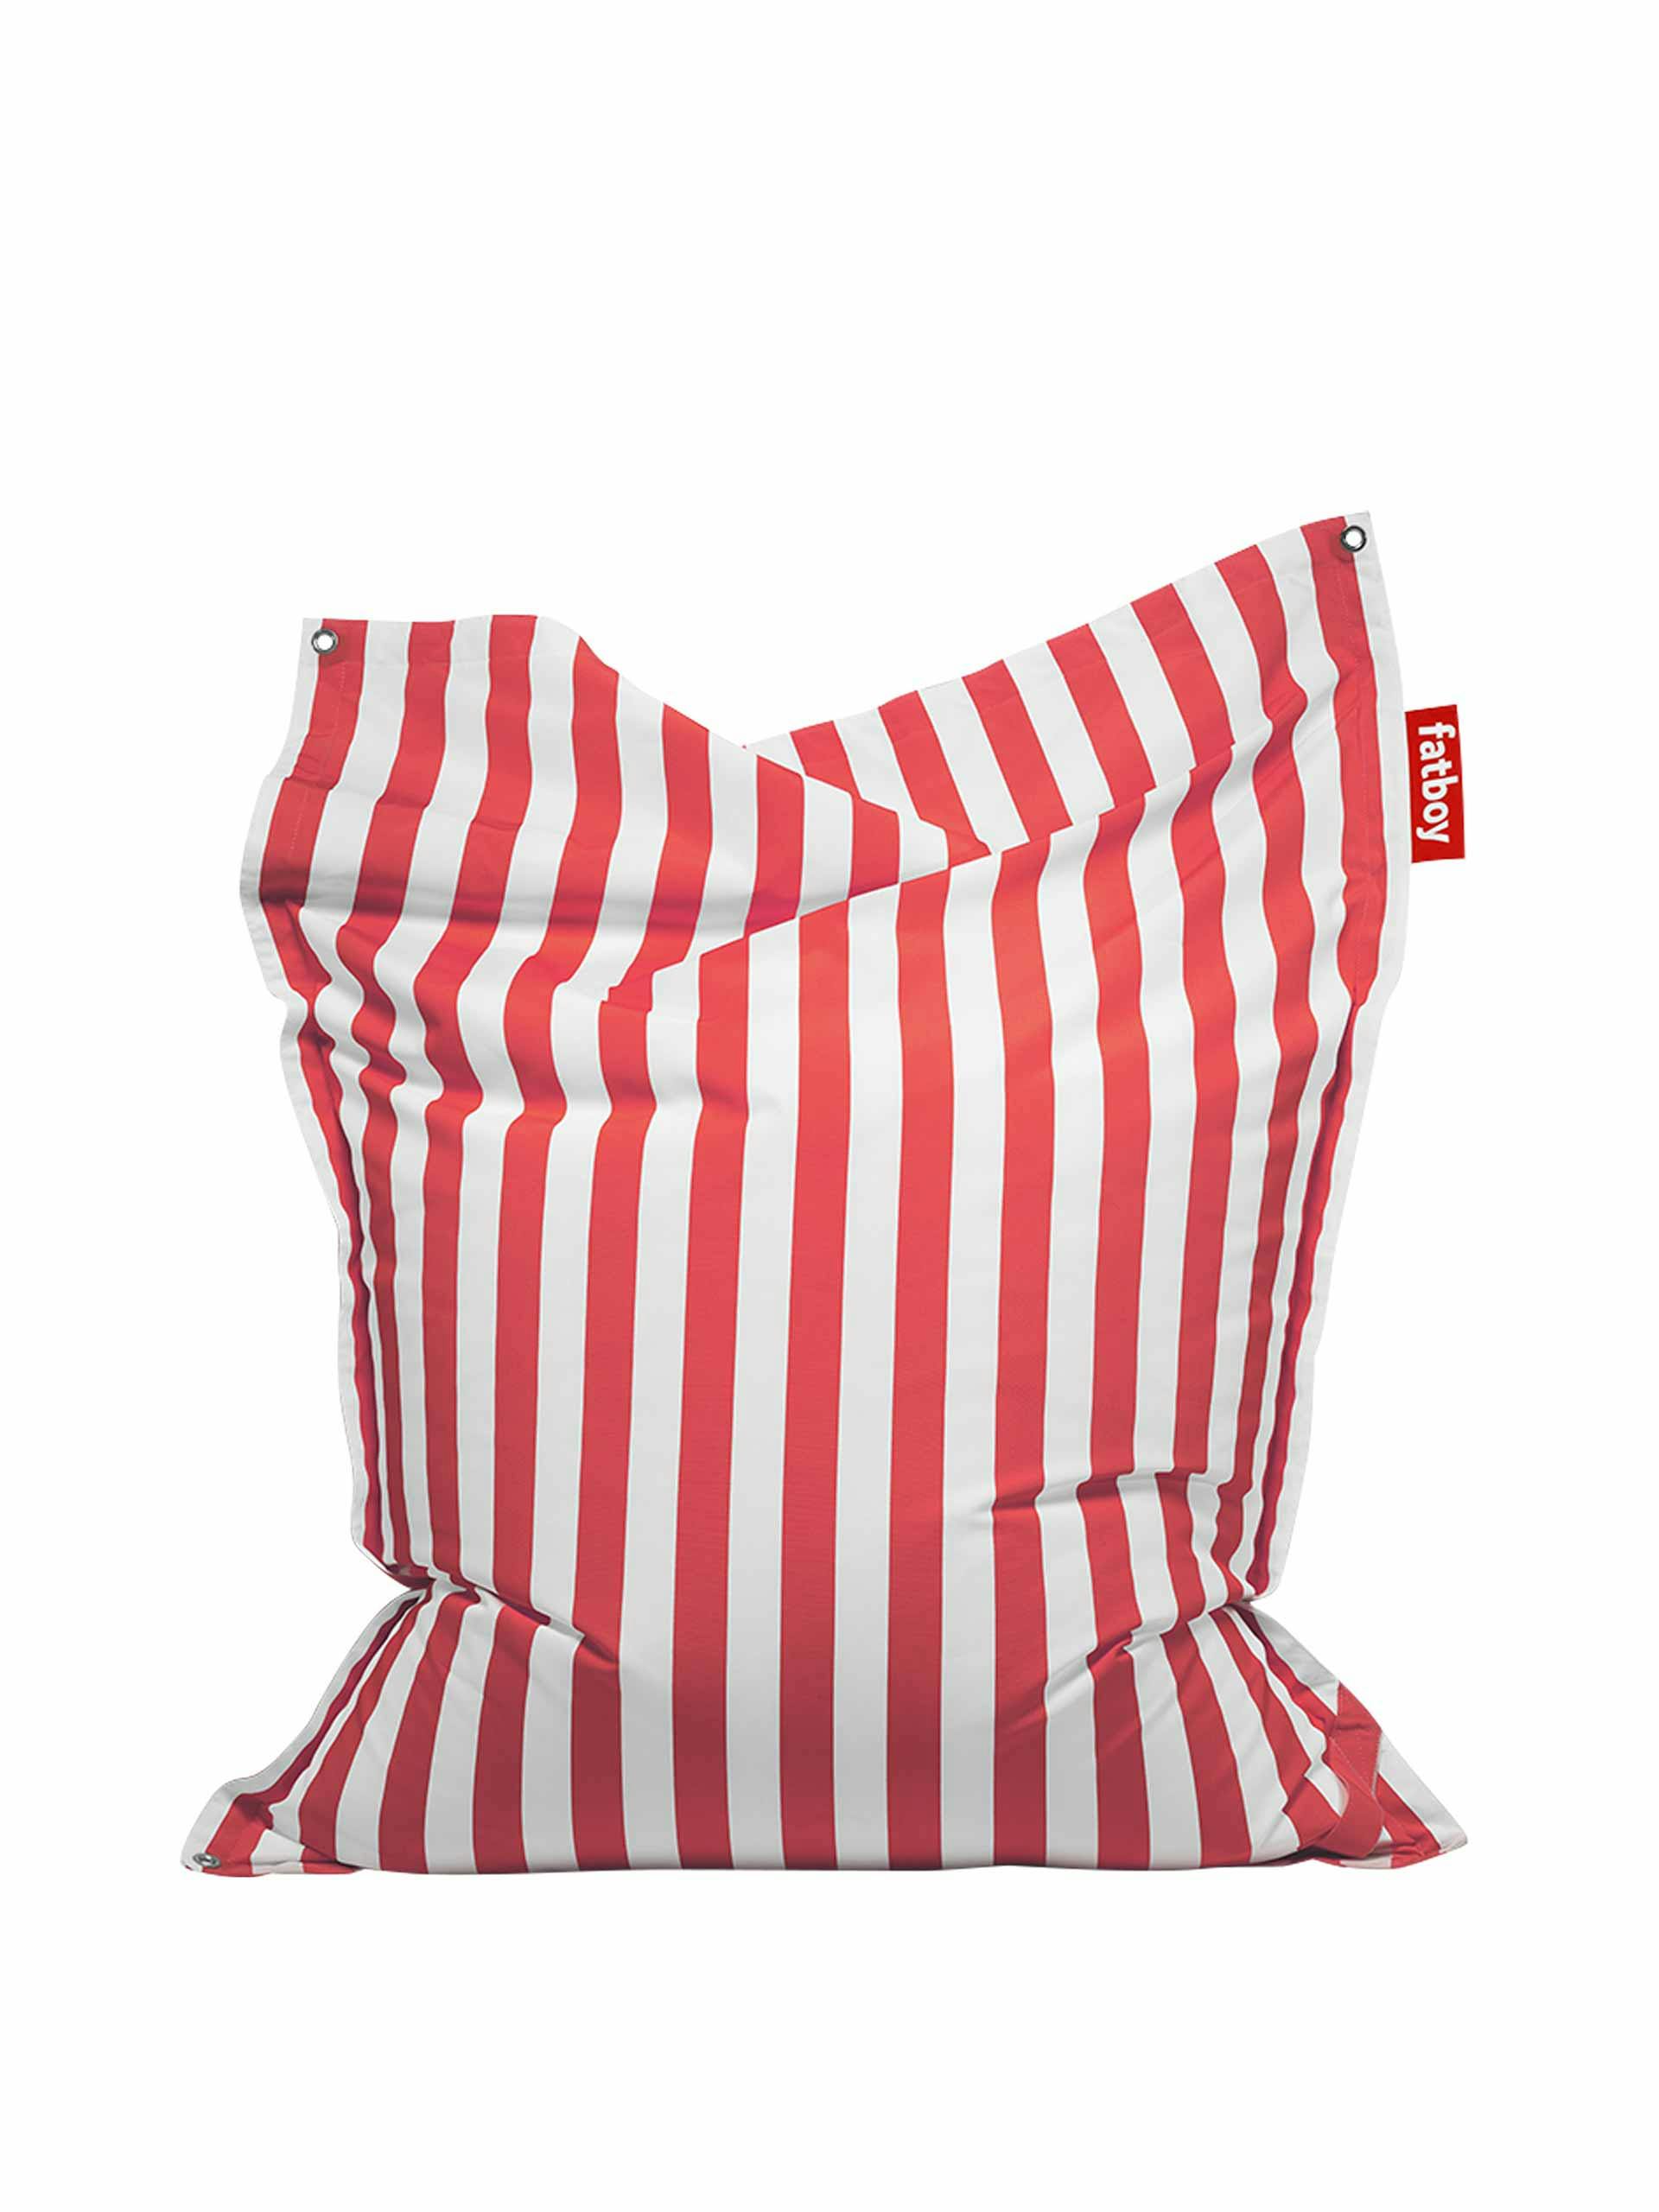 Red and white striped bean bag